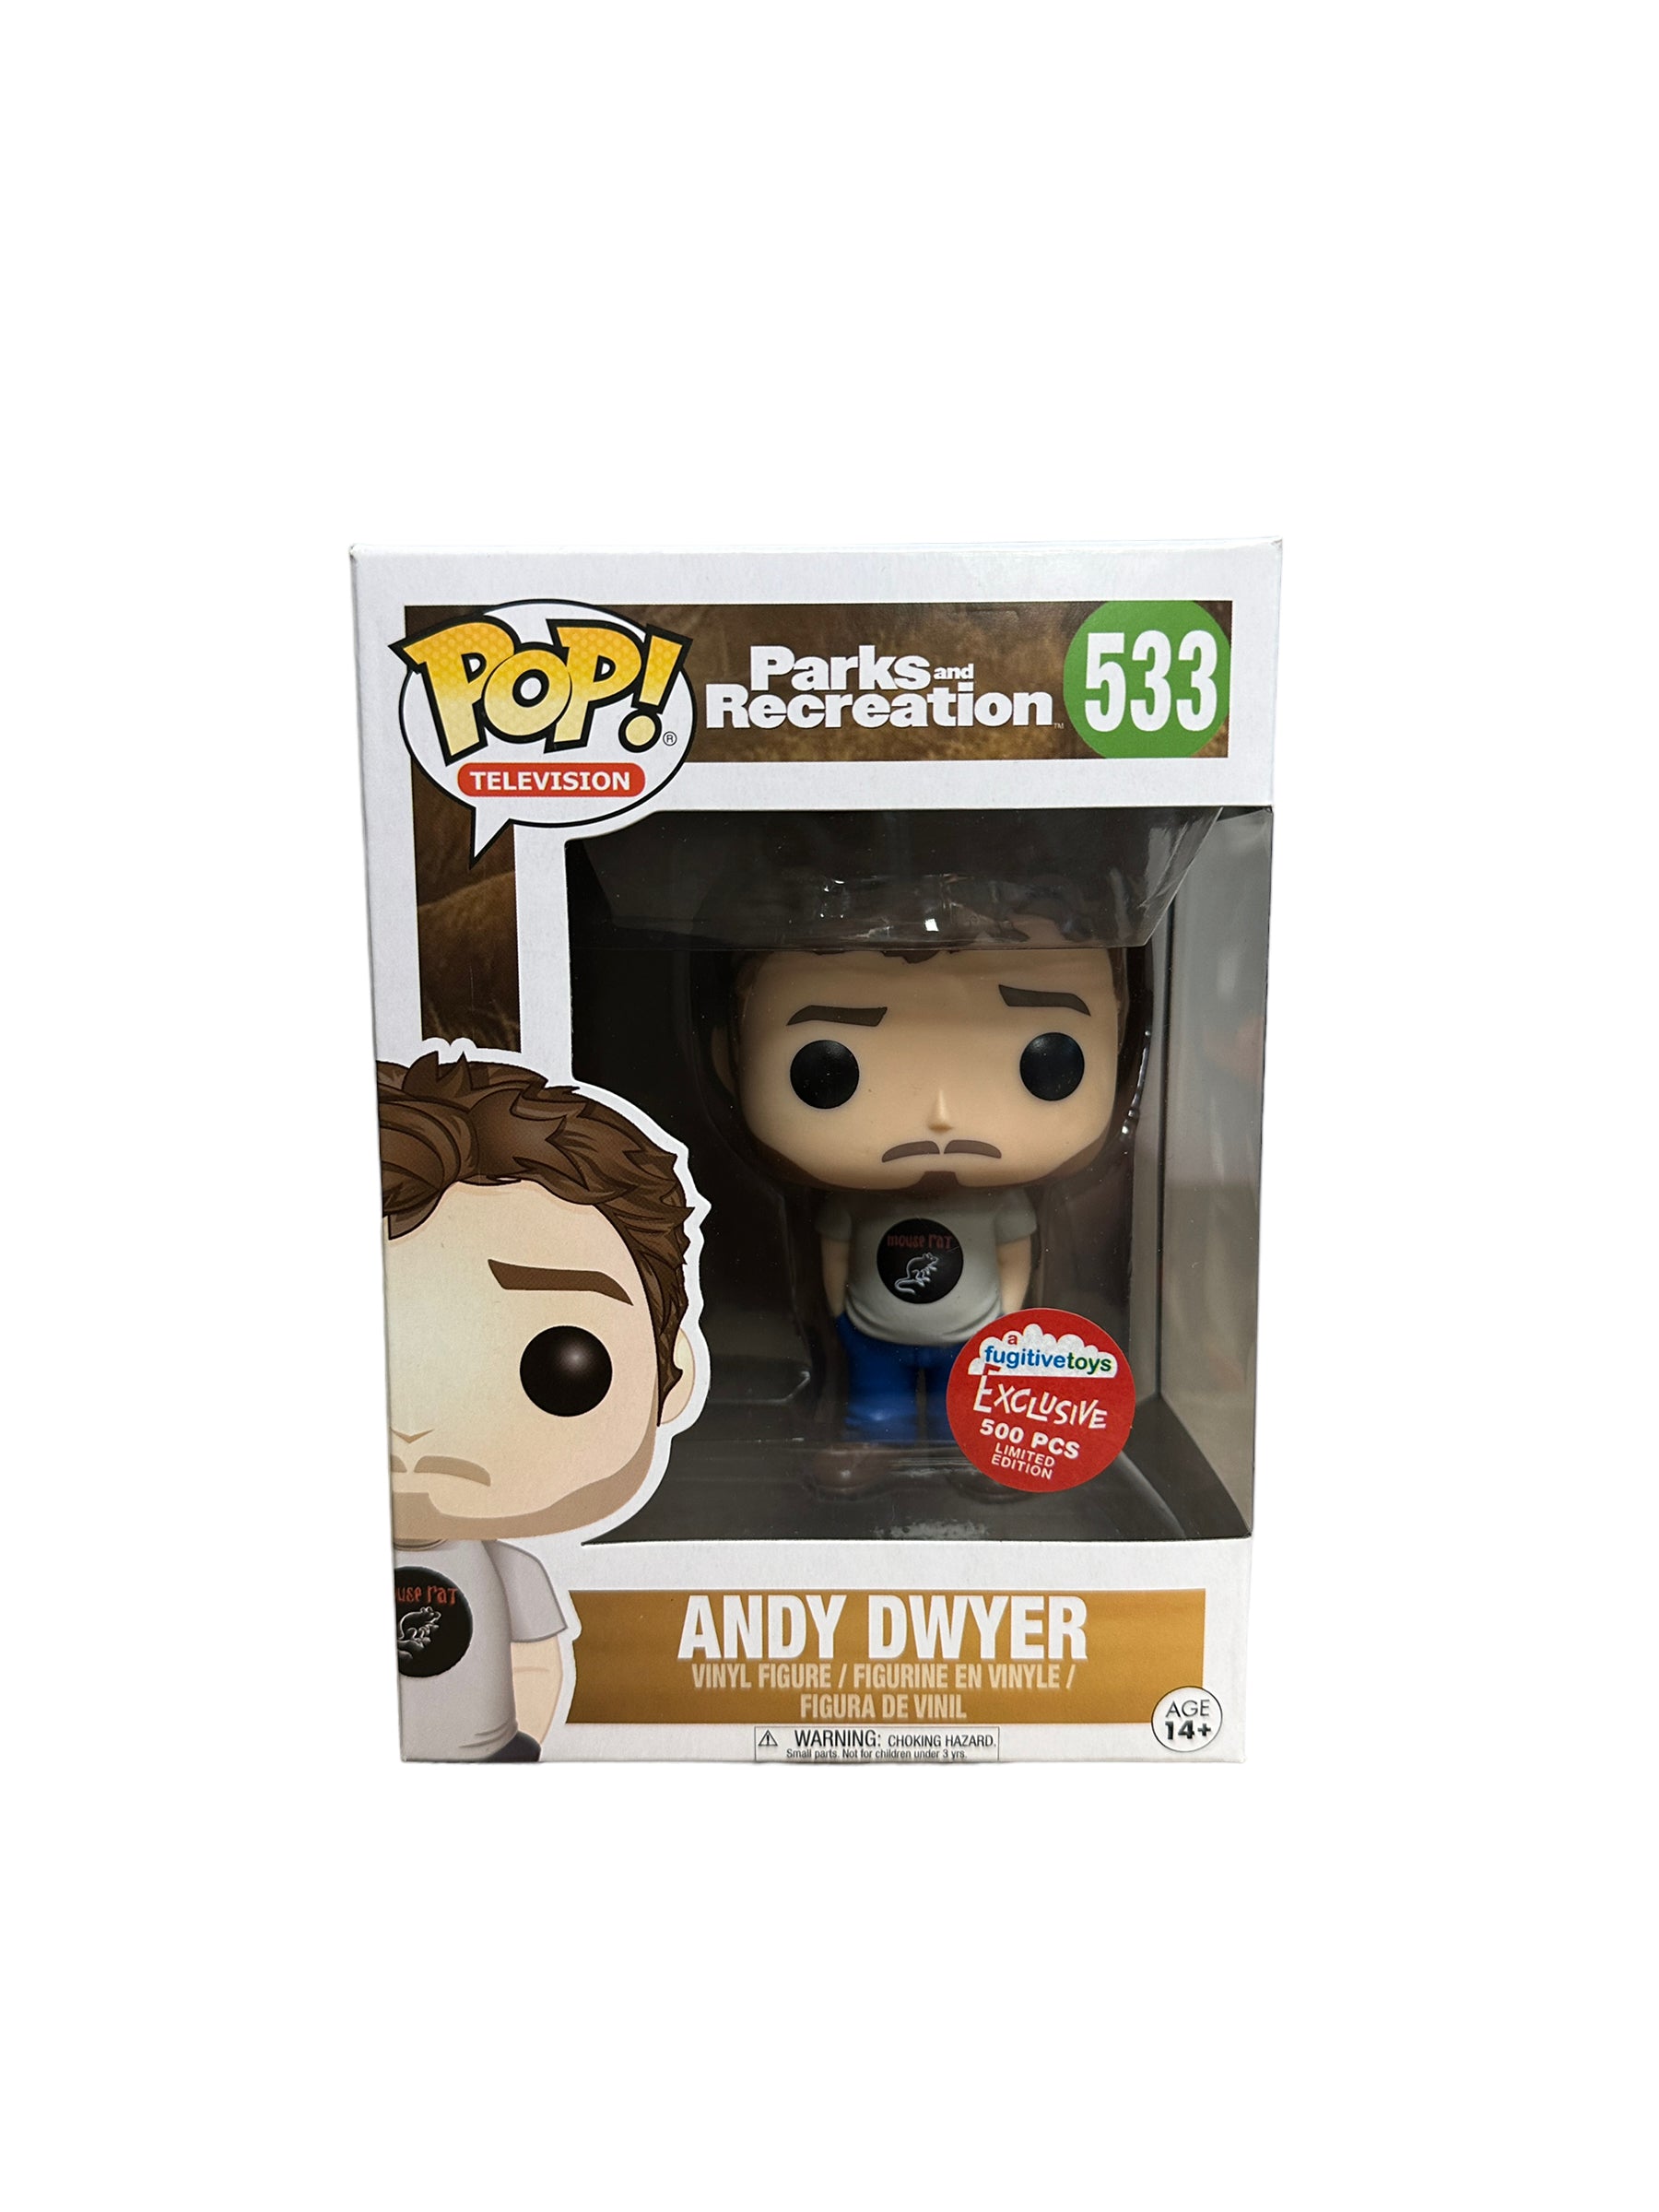 Andy Dwyer #533 (Mouse Rat T-Shirt) Funko Pop! - Parks and Recreation - Fugitive Toys Exclusive LE500 Pcs - Condition 9/10